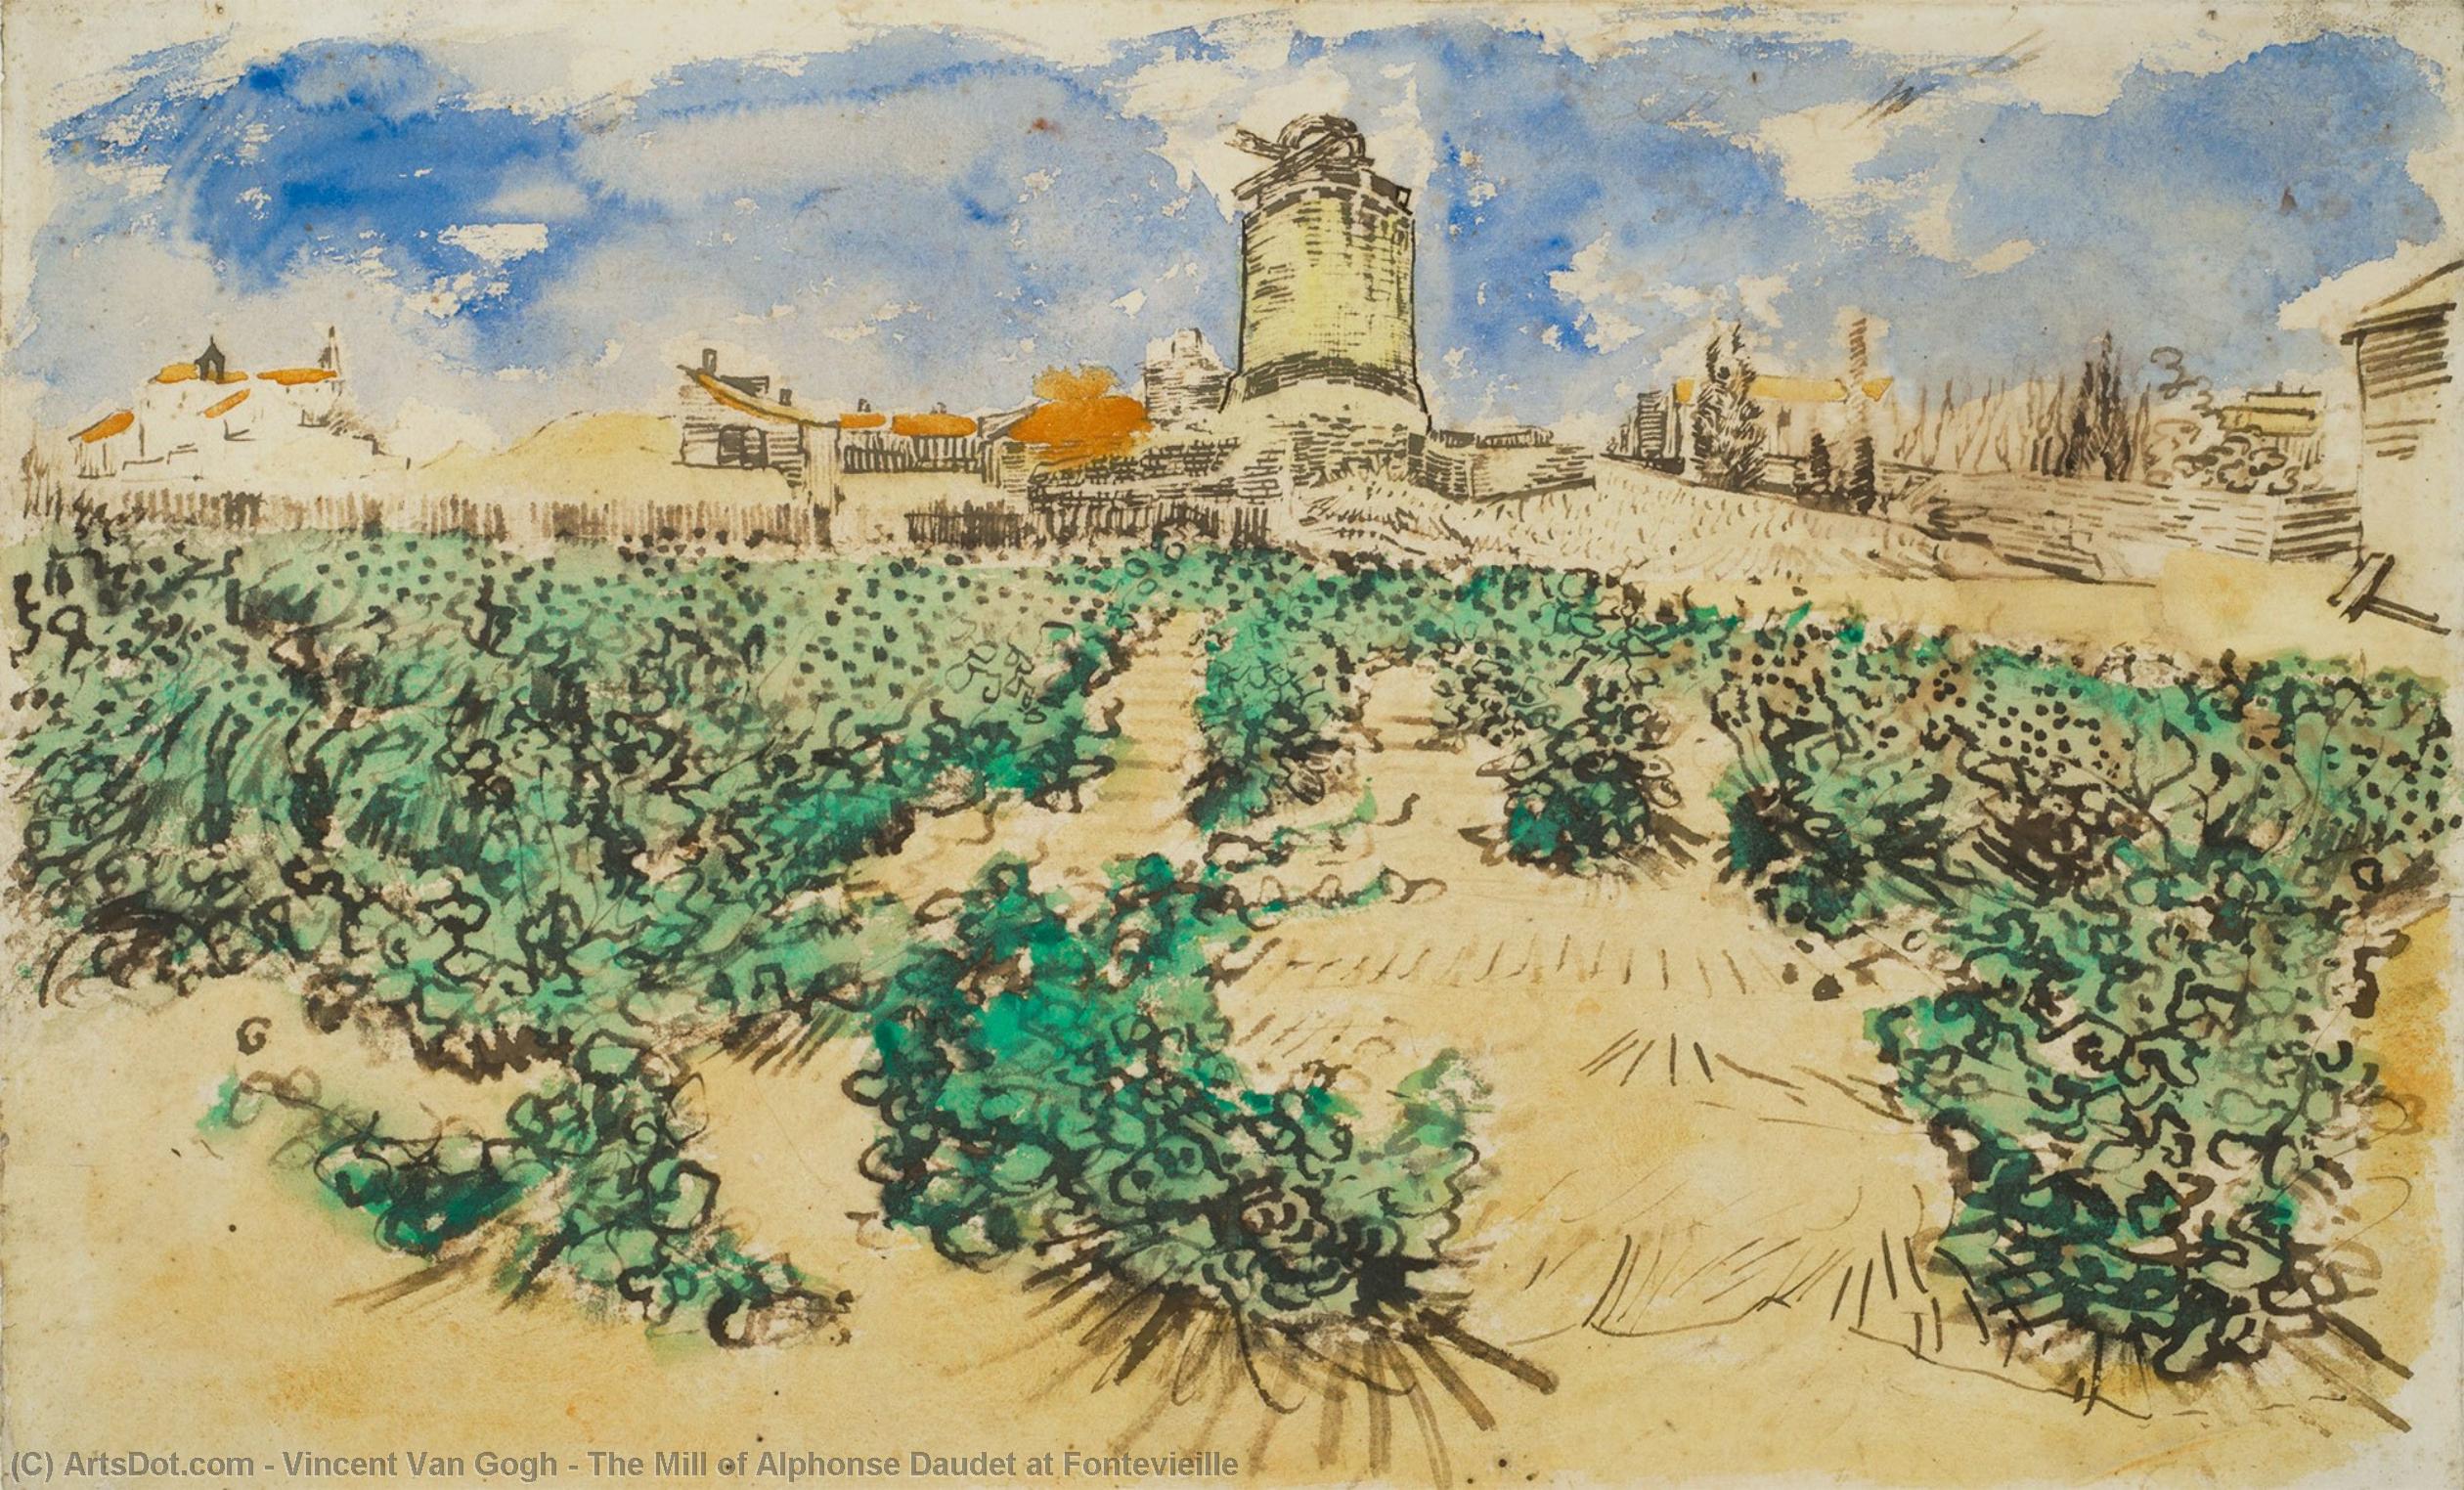 WikiOO.org - Encyclopedia of Fine Arts - Maalaus, taideteos Vincent Van Gogh - The Mill of Alphonse Daudet at Fontevieille